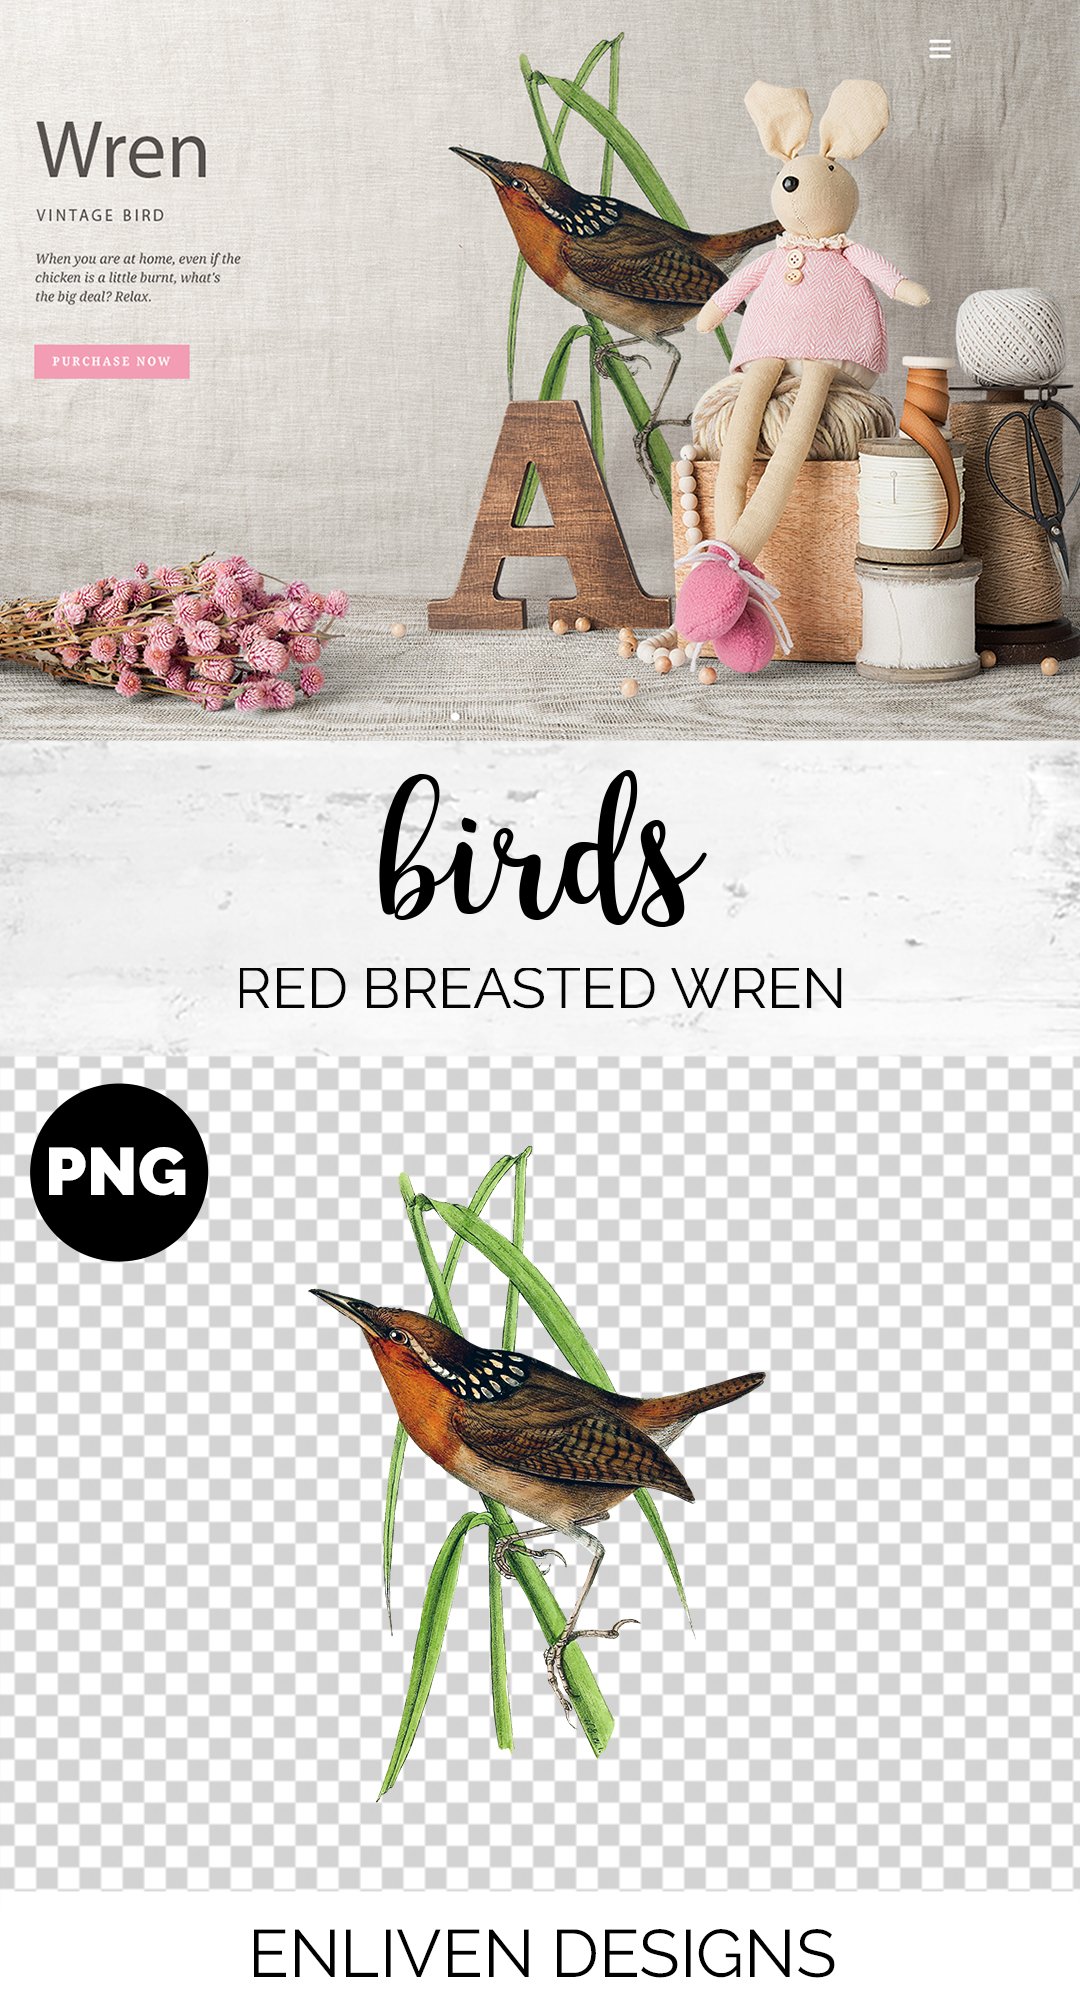 Wren Red Breasted Bird Vintage preview image.